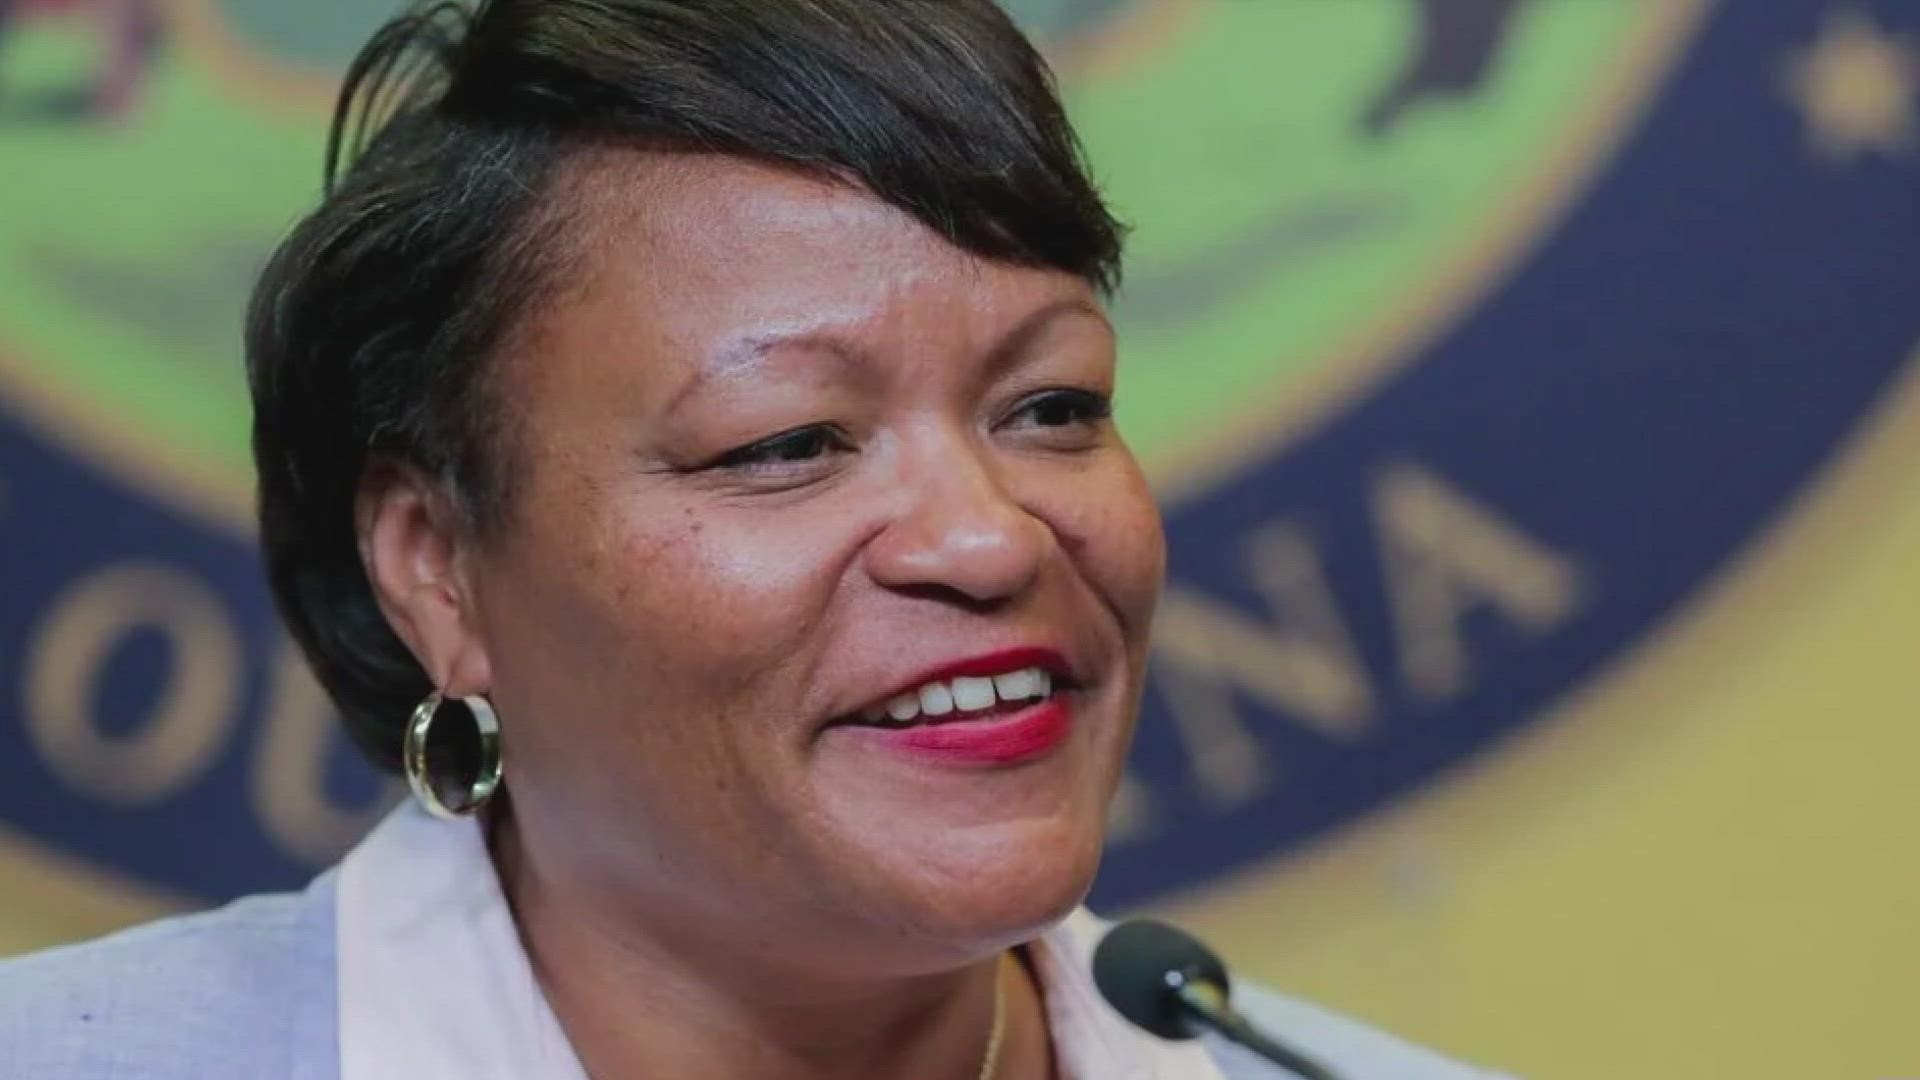 A spokesperson admits Mayor LaToya Cantrell has been living in the apartment rent free but says there is nothing wrong with that.